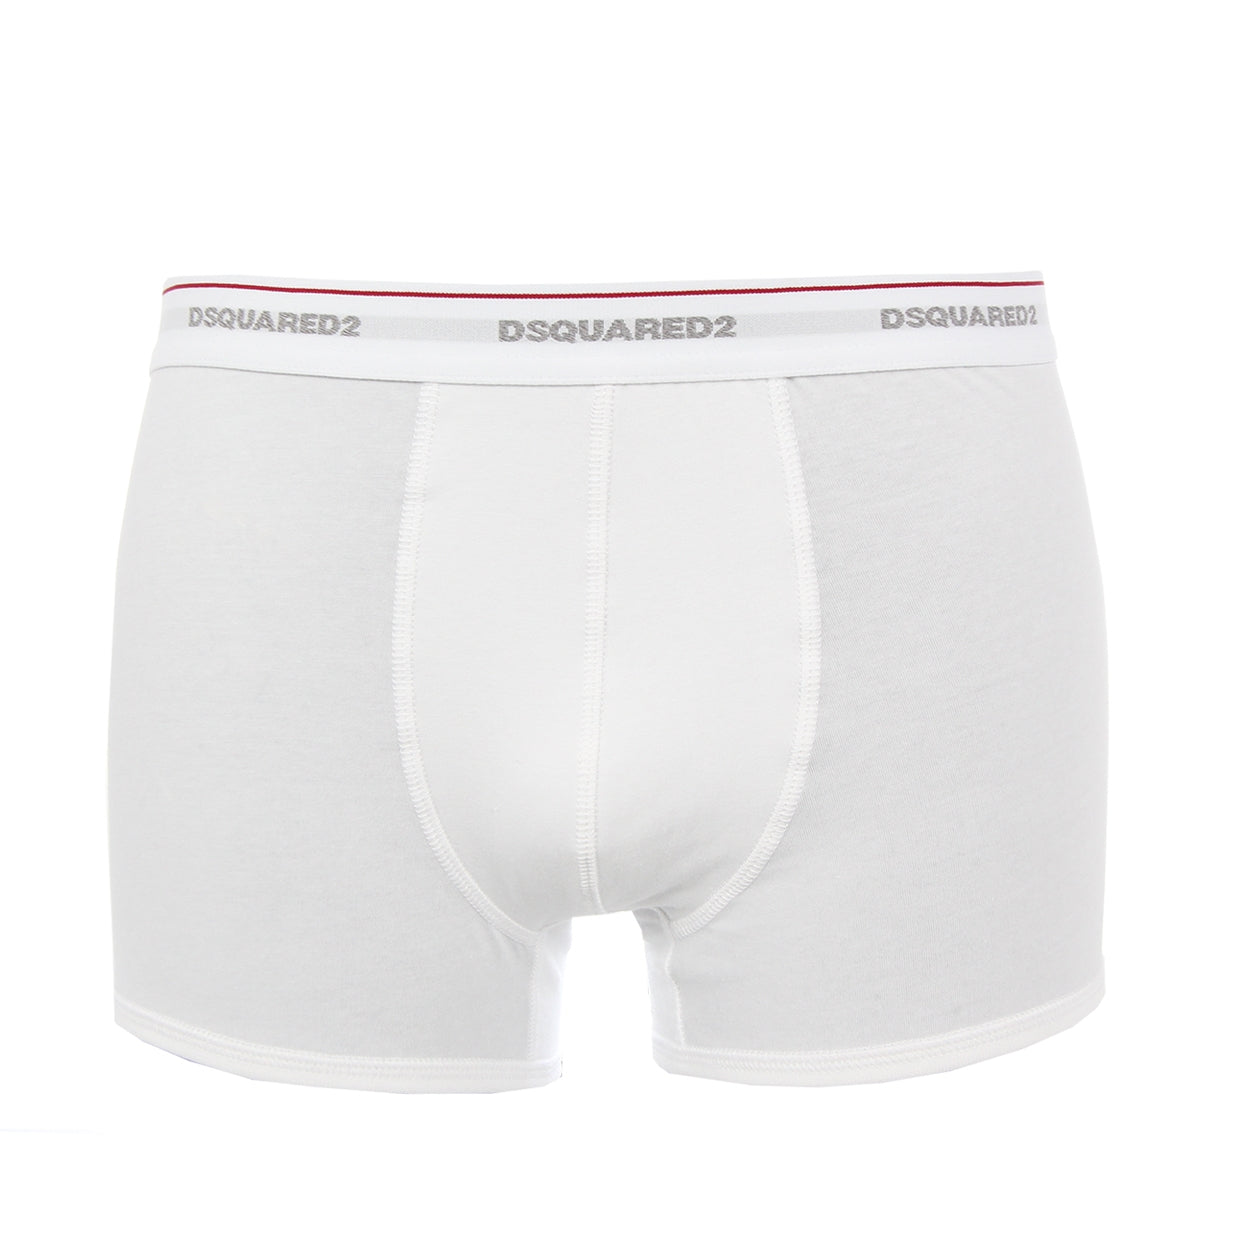 DSquared2 Twin Pack White Cotton Stretch Boxer Shorts front 